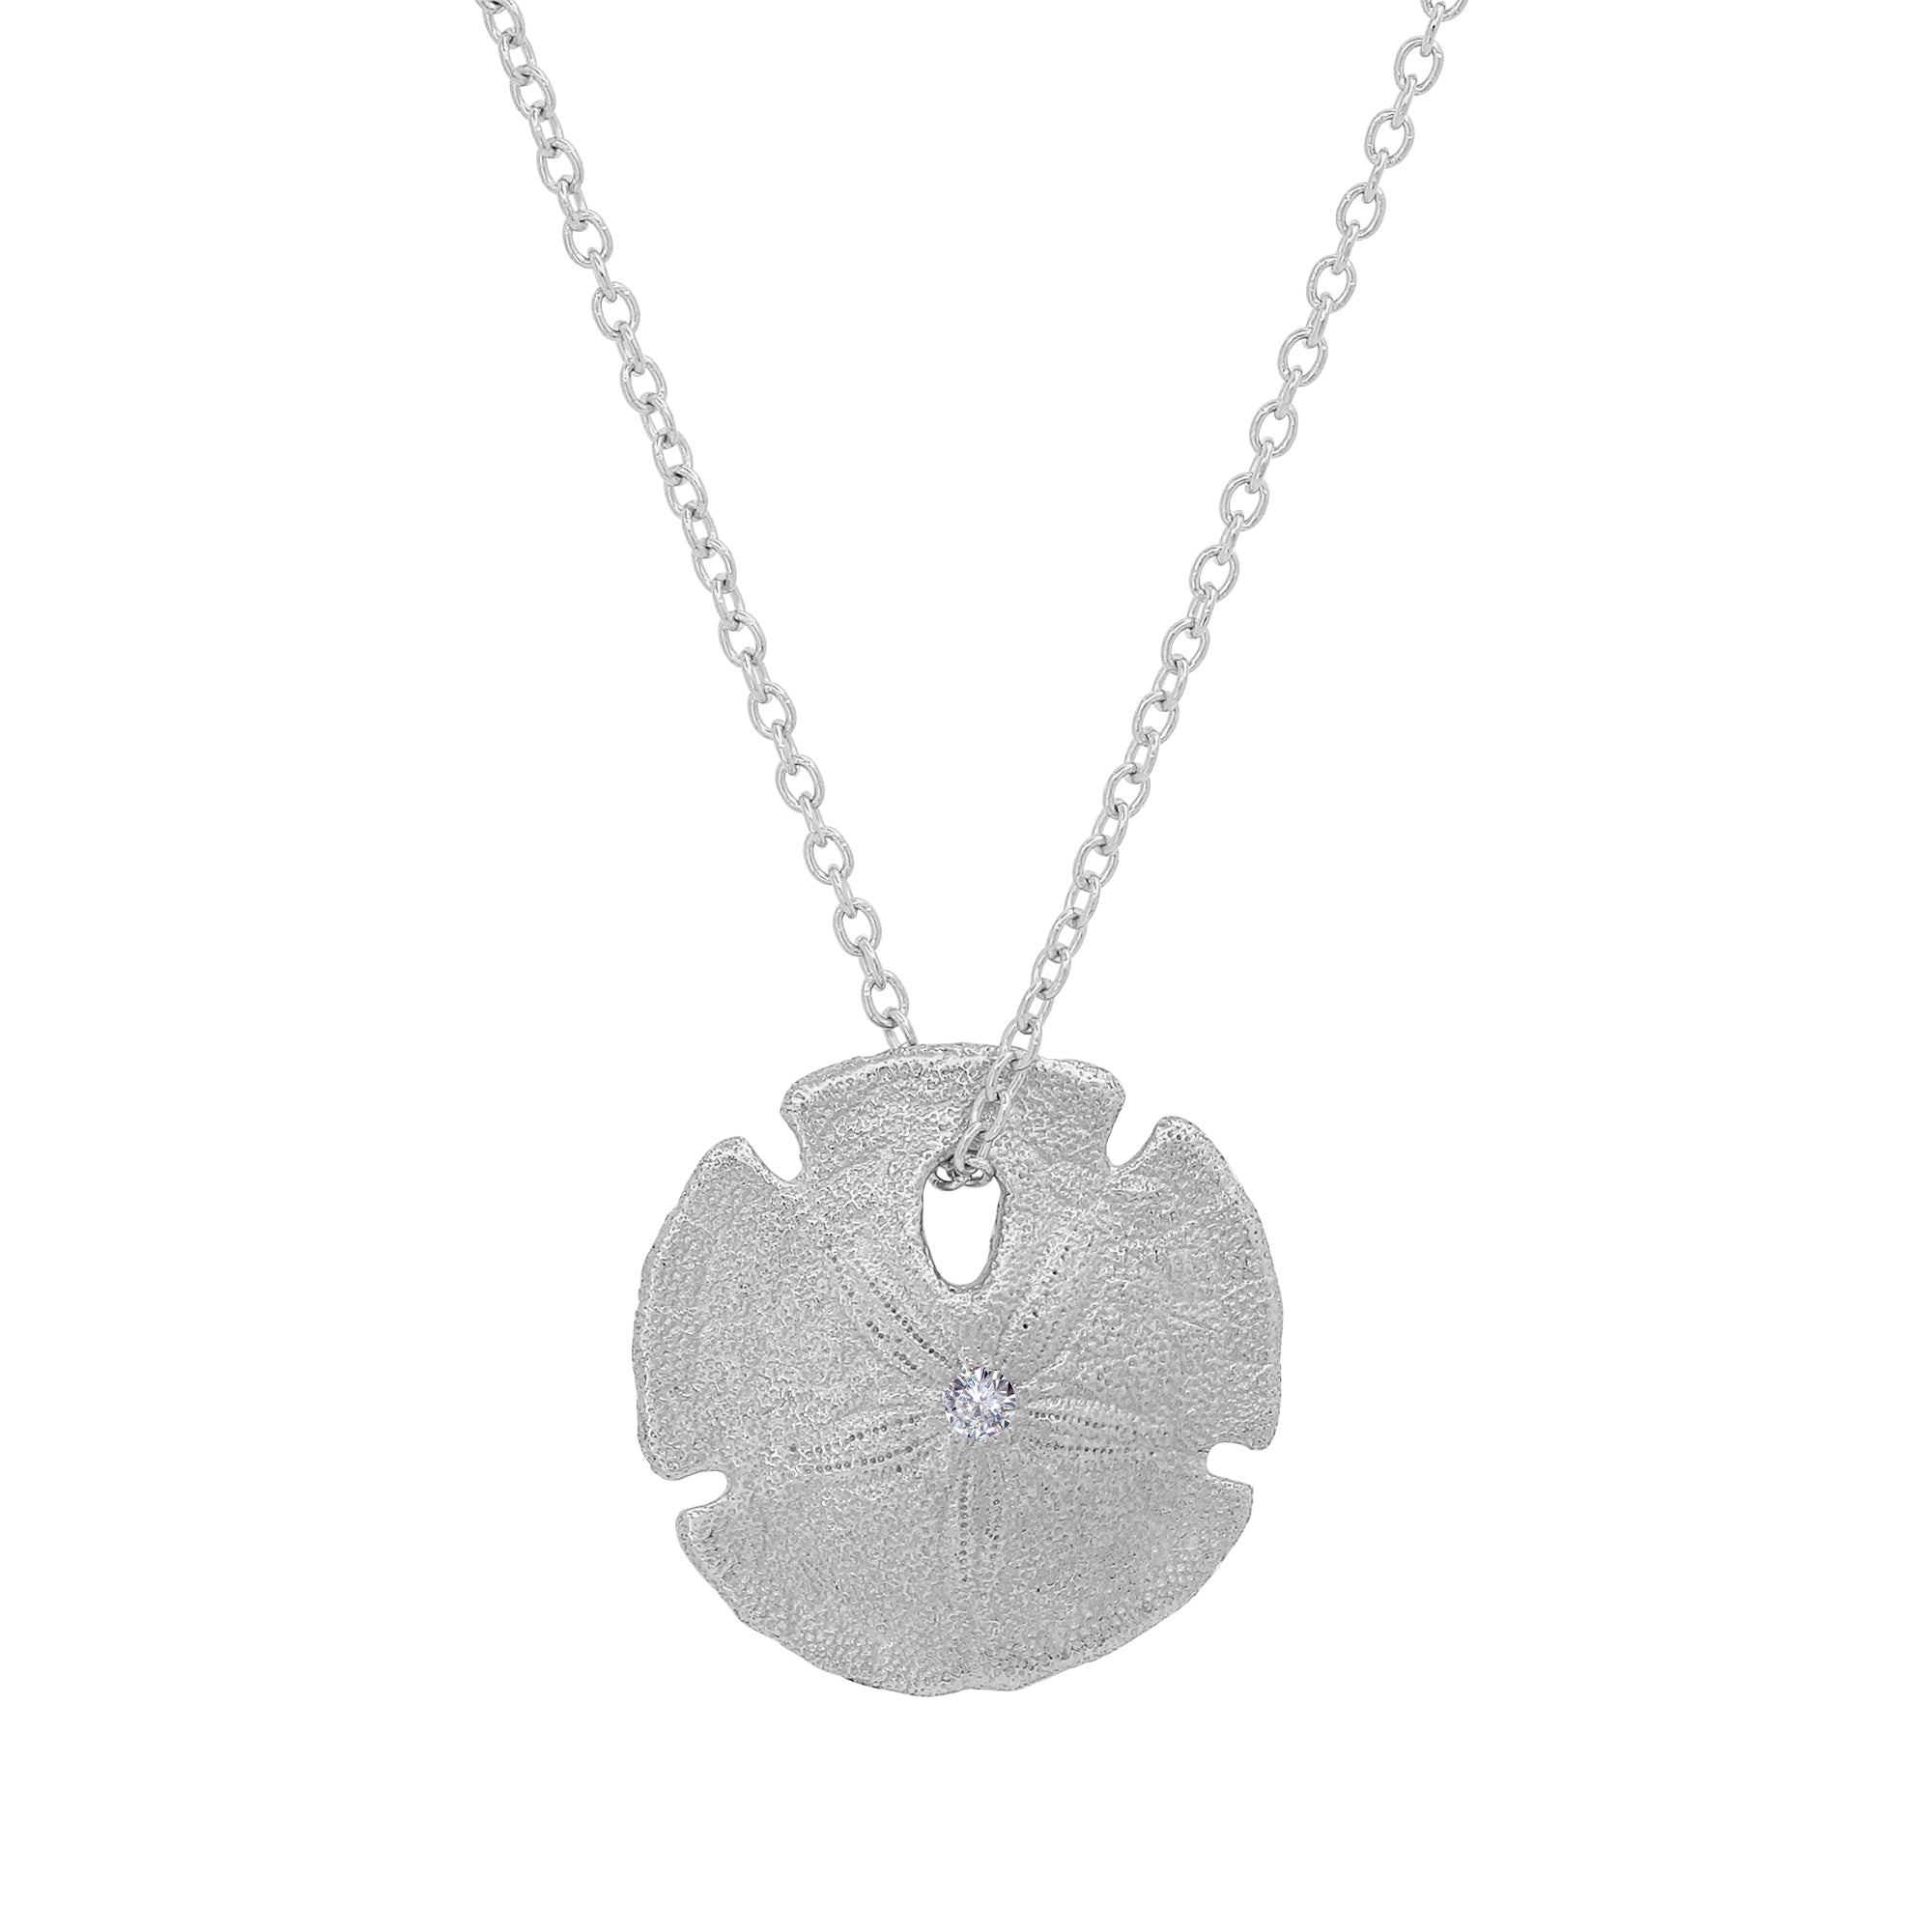 Small Sand Dollar Necklace Pendant Elisabeth Bell Jewelry White Gold  